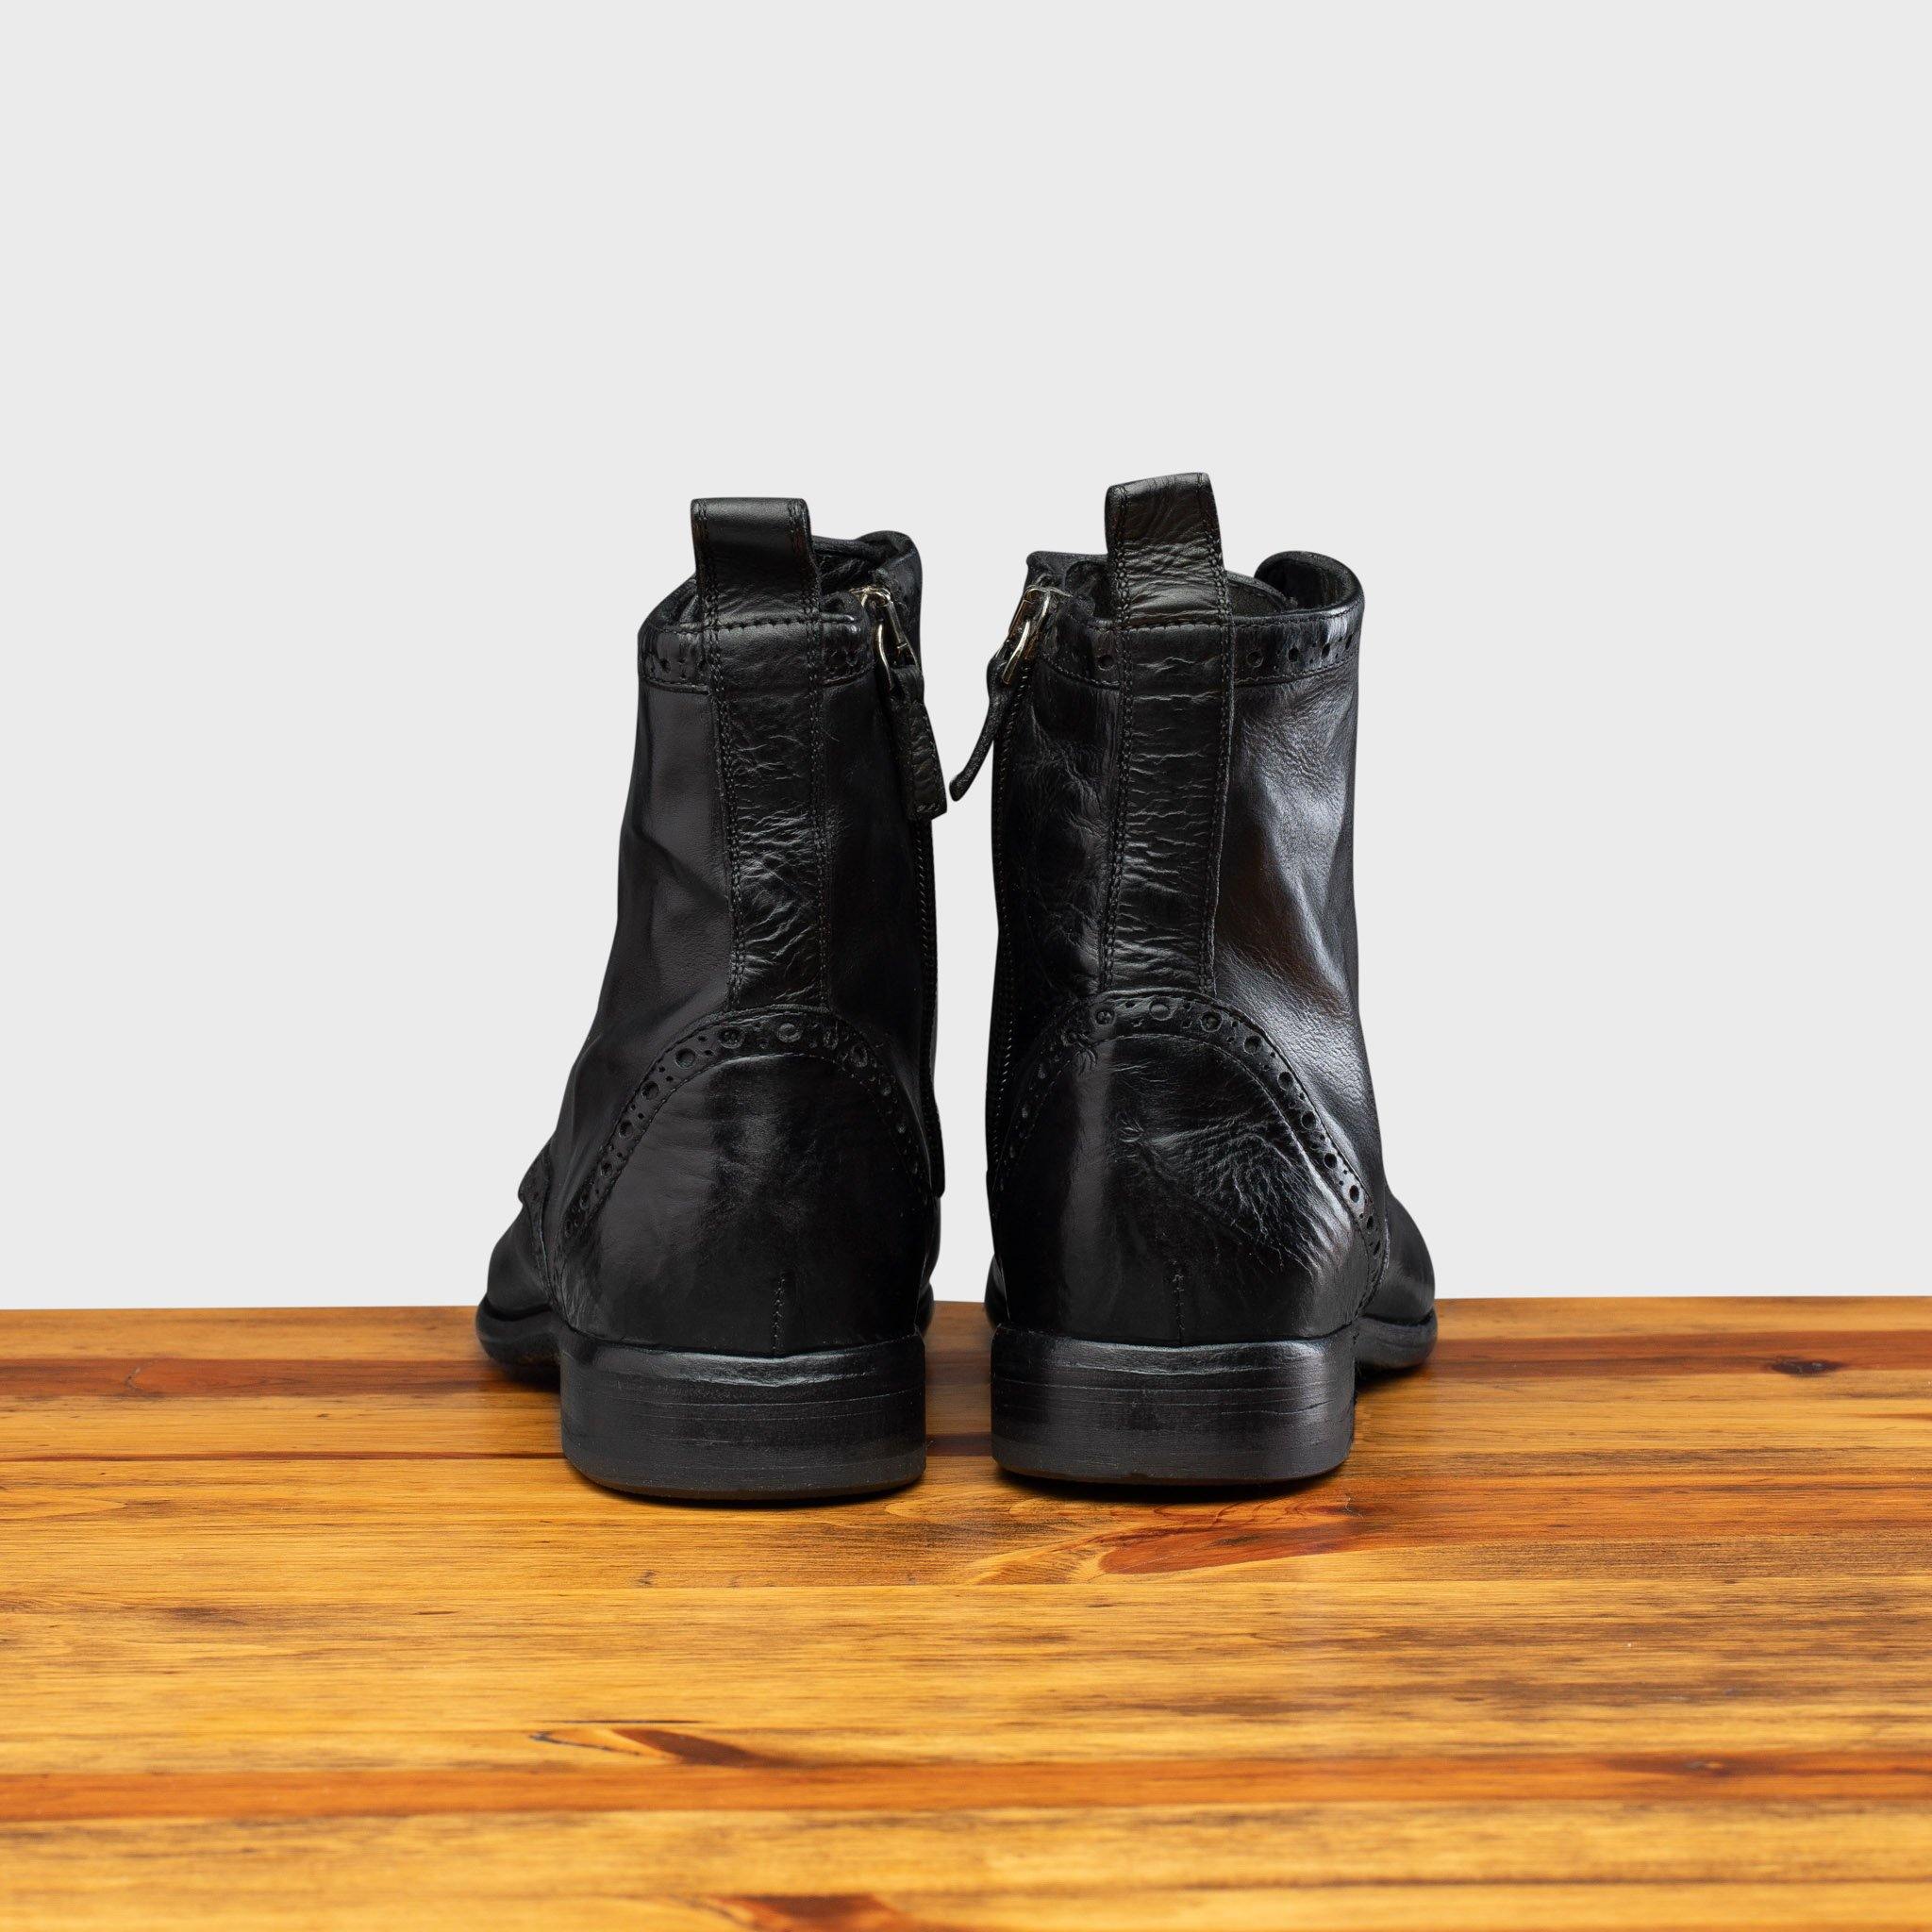 Back profile of 7149 Calzoleria Toscana Women's Black Dip-Dyed Diver Combat Boot on top of a wooden table